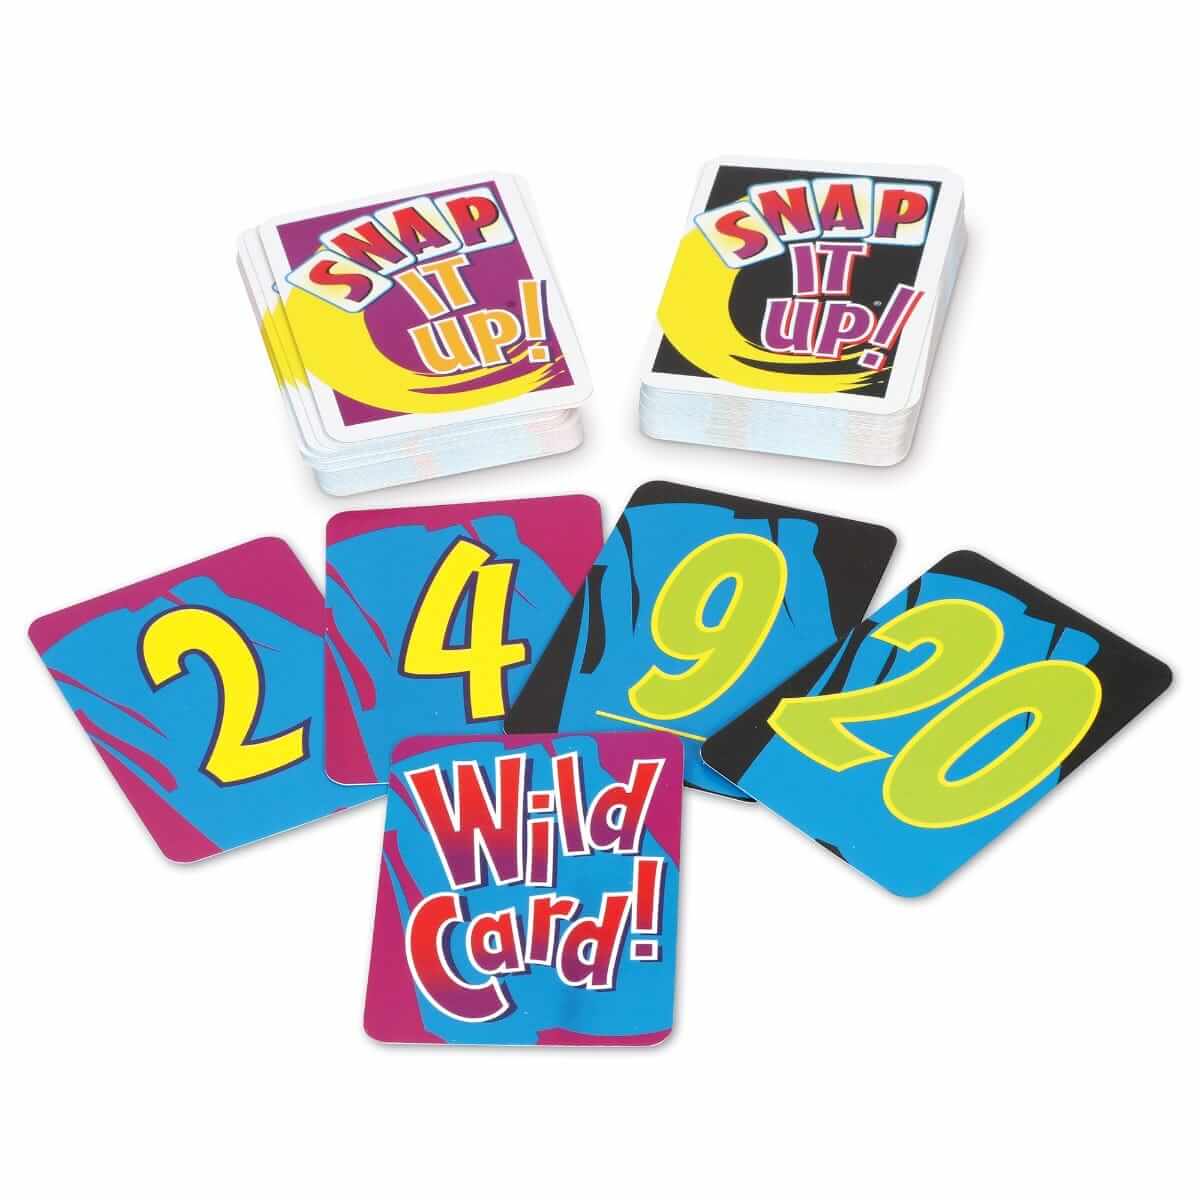 Snap It Up! Addition & Subtraction Card Game